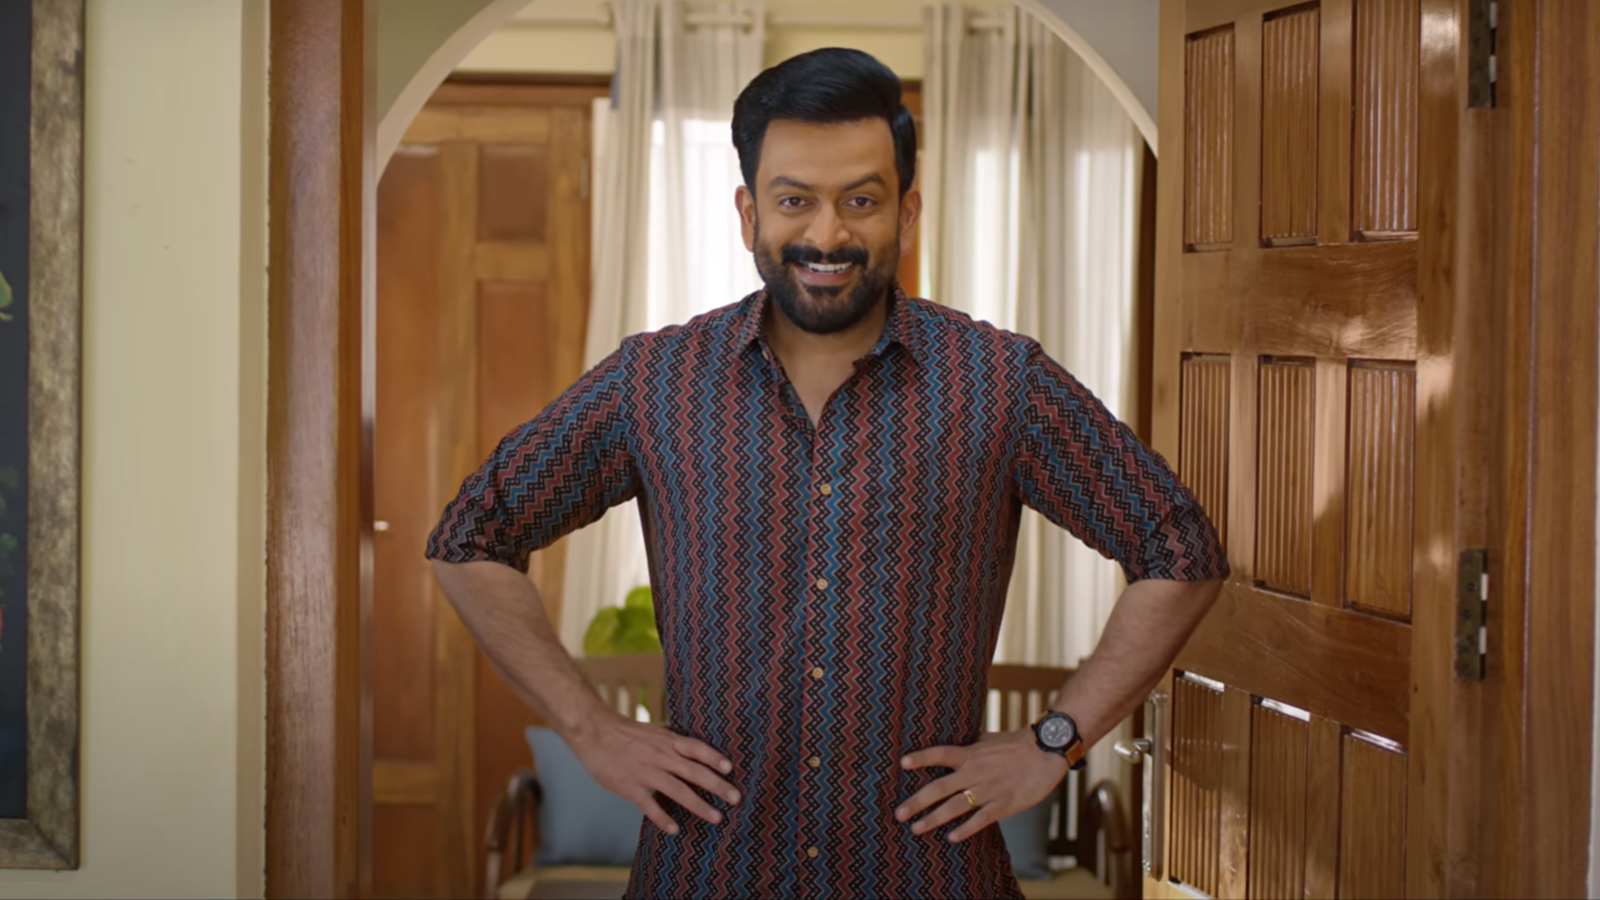 android, guruvayoorambala nadayil director says both he and prithviraj had concerns about the actor’s comedy skills: ‘we did not expect this outcome’